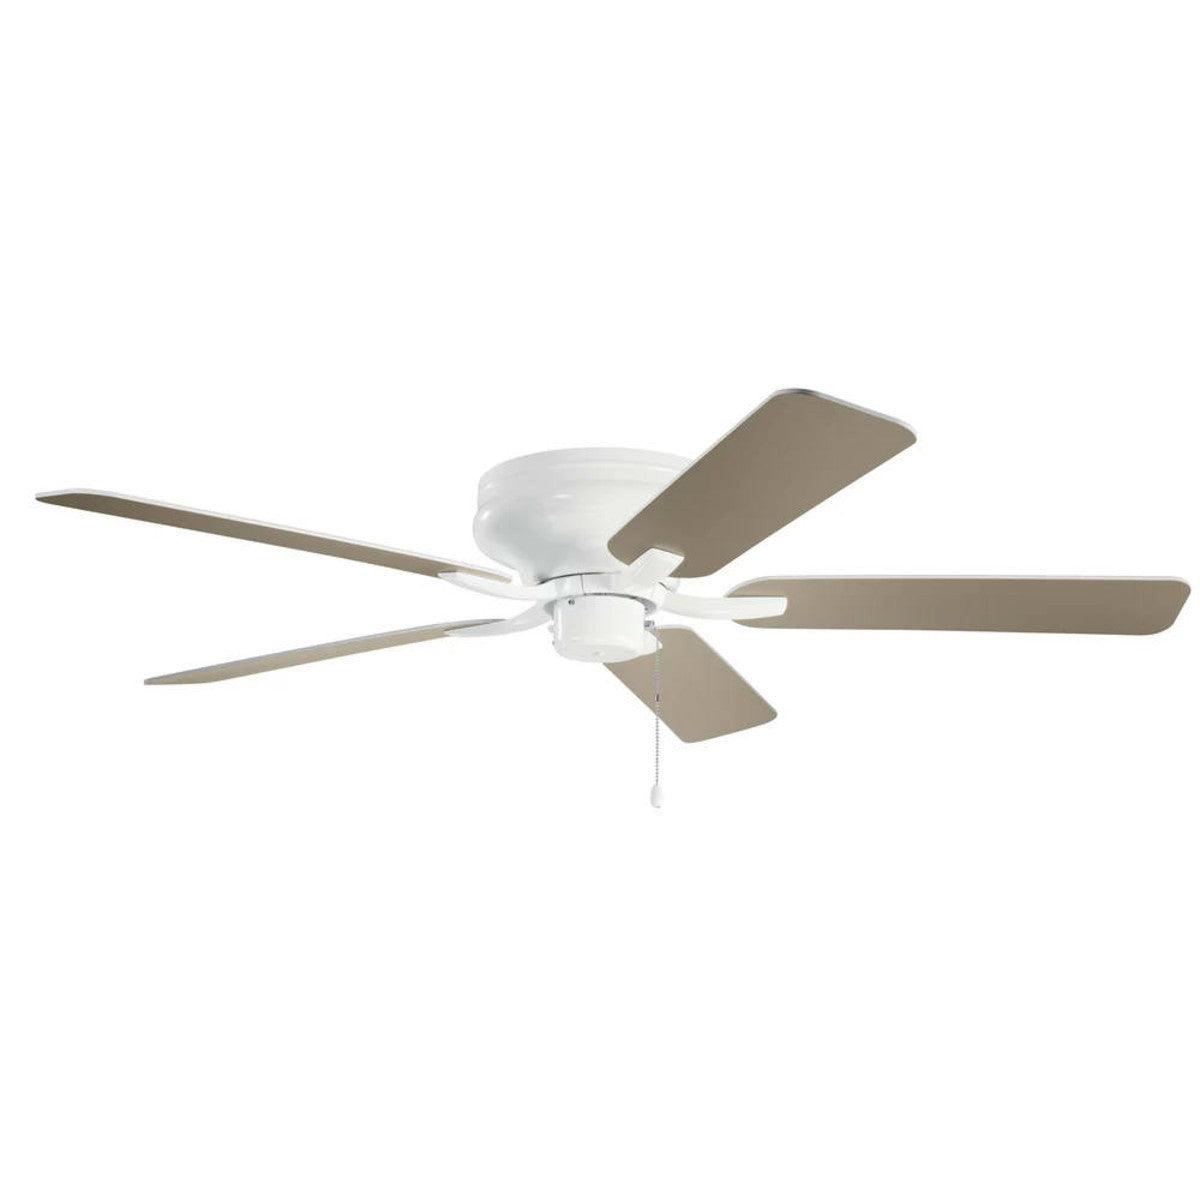 Basics Pro 52 Inch Low Profile Ceiling Fan With Pull Chain - Bees Lighting